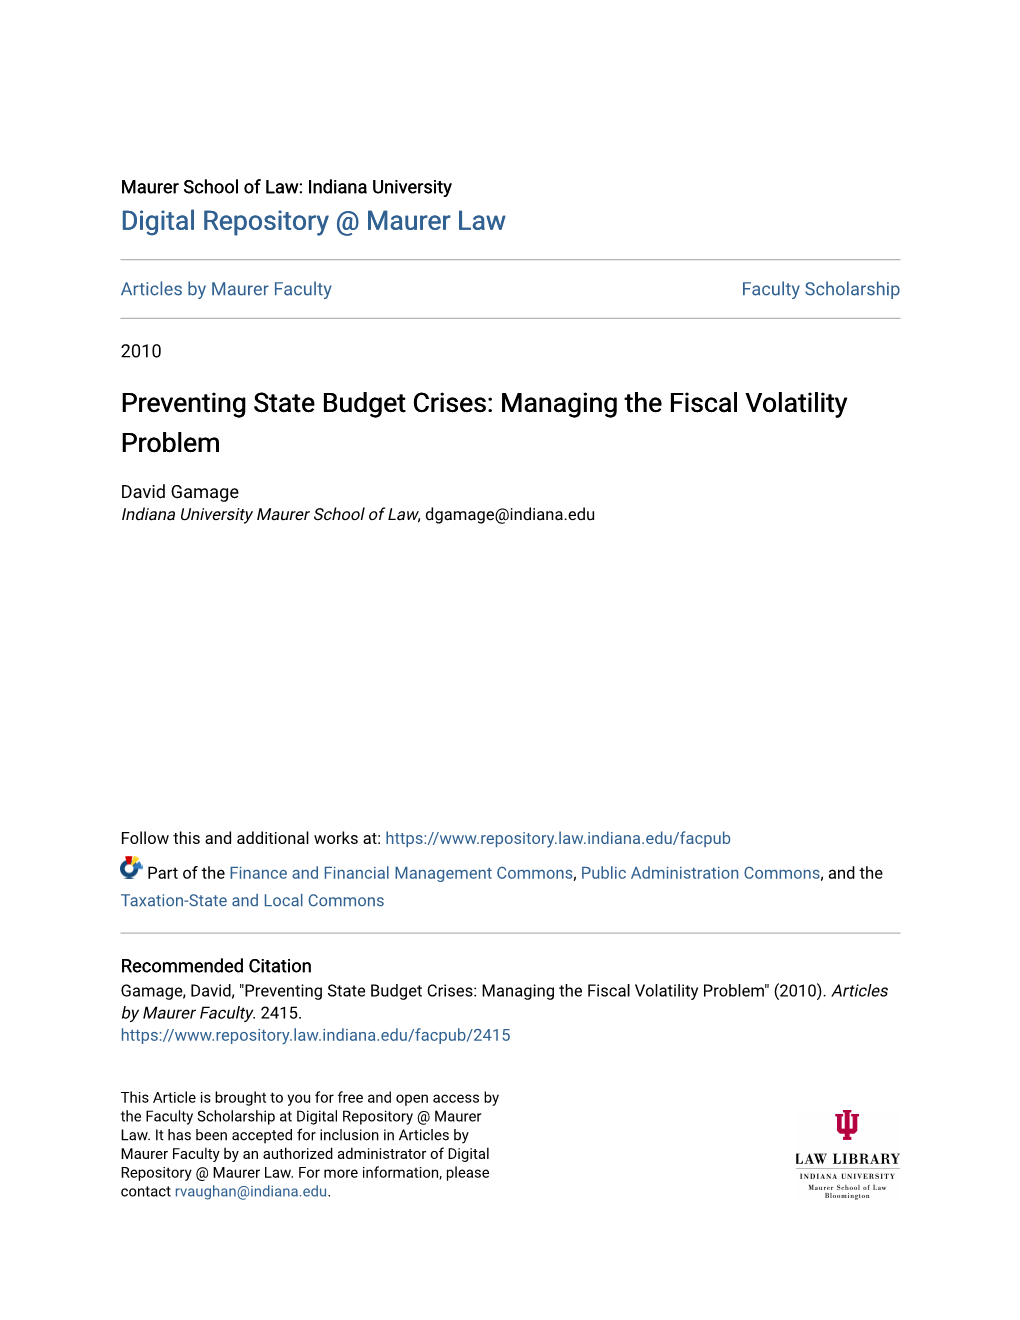 Preventing State Budget Crises: Managing the Fiscal Volatility Problem